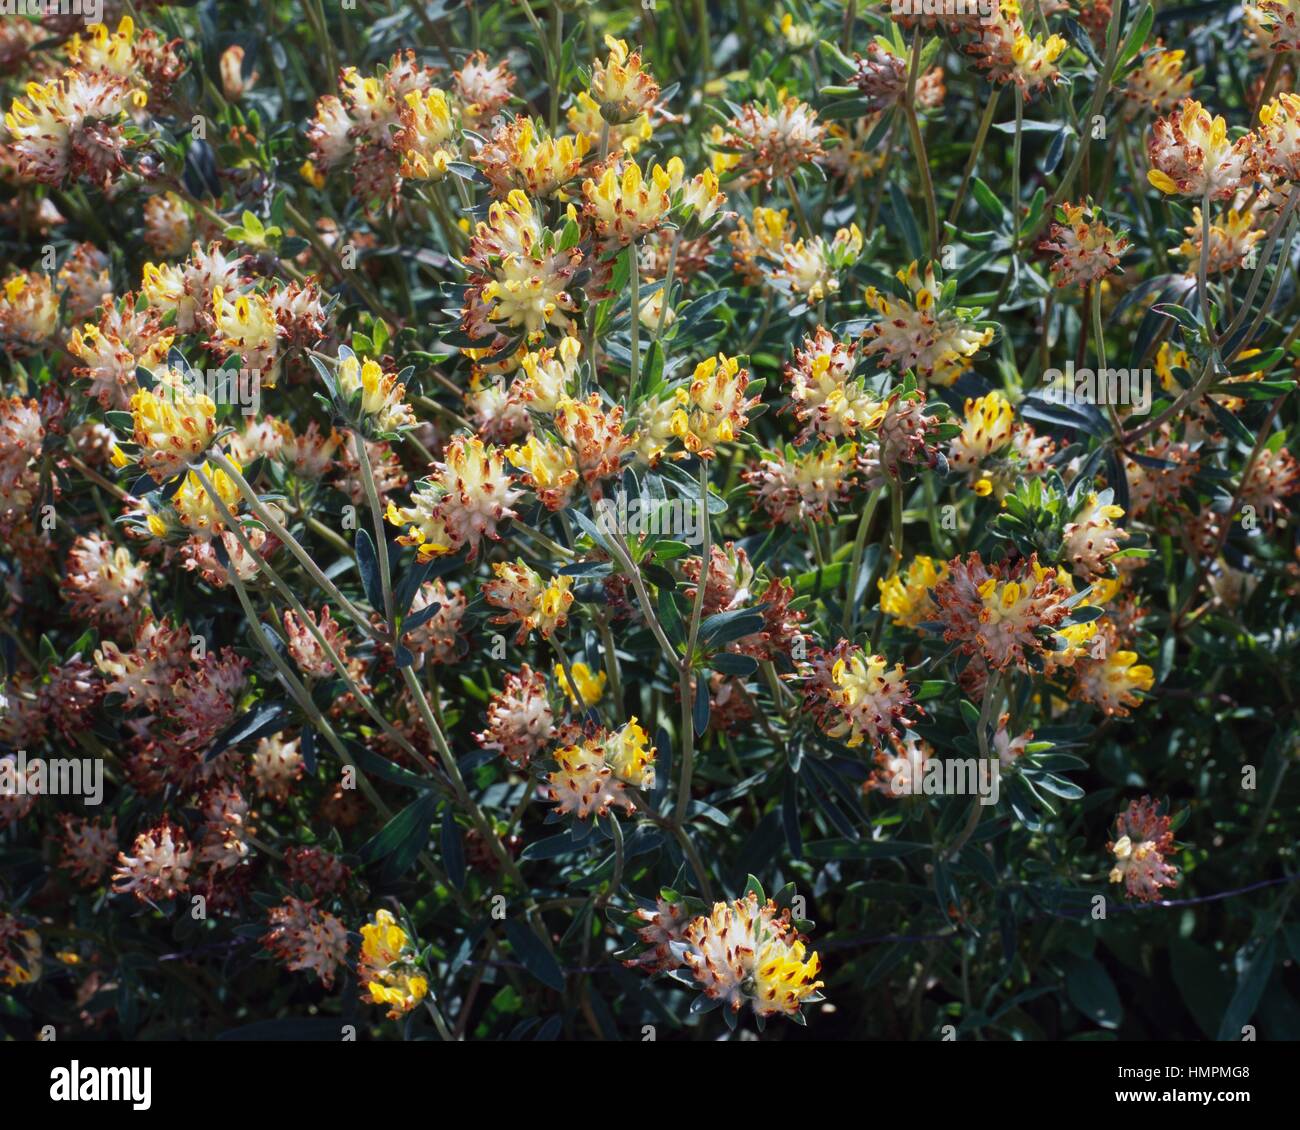 Common kidneyvetch, Kidney vetch or Woundwort (Anthyllis vulneraria), Fabaceae. Stock Photo